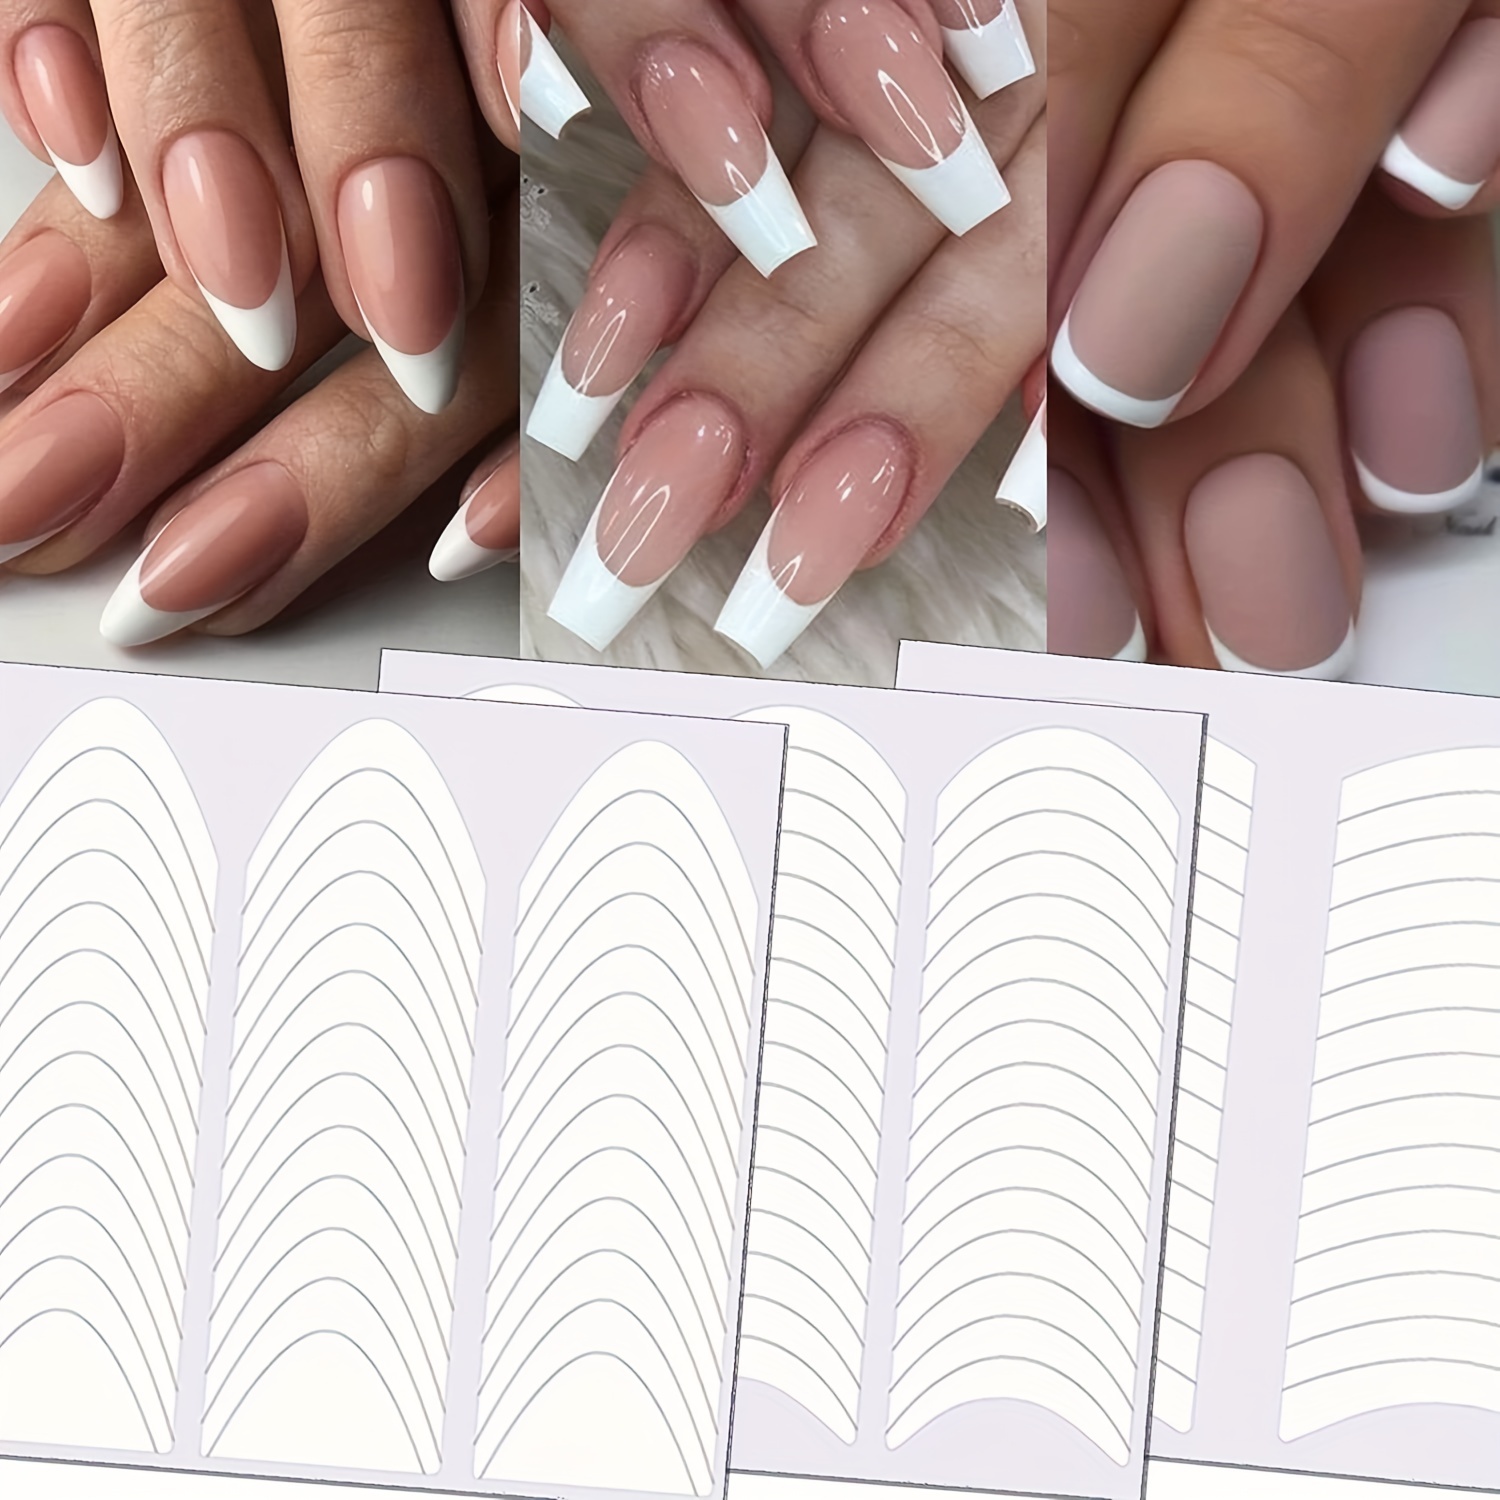 

730pcs French Manicure Nail Art Stickers - Self-adhesive Nail Tips Guides For Diy Decoration And Stencil Tools